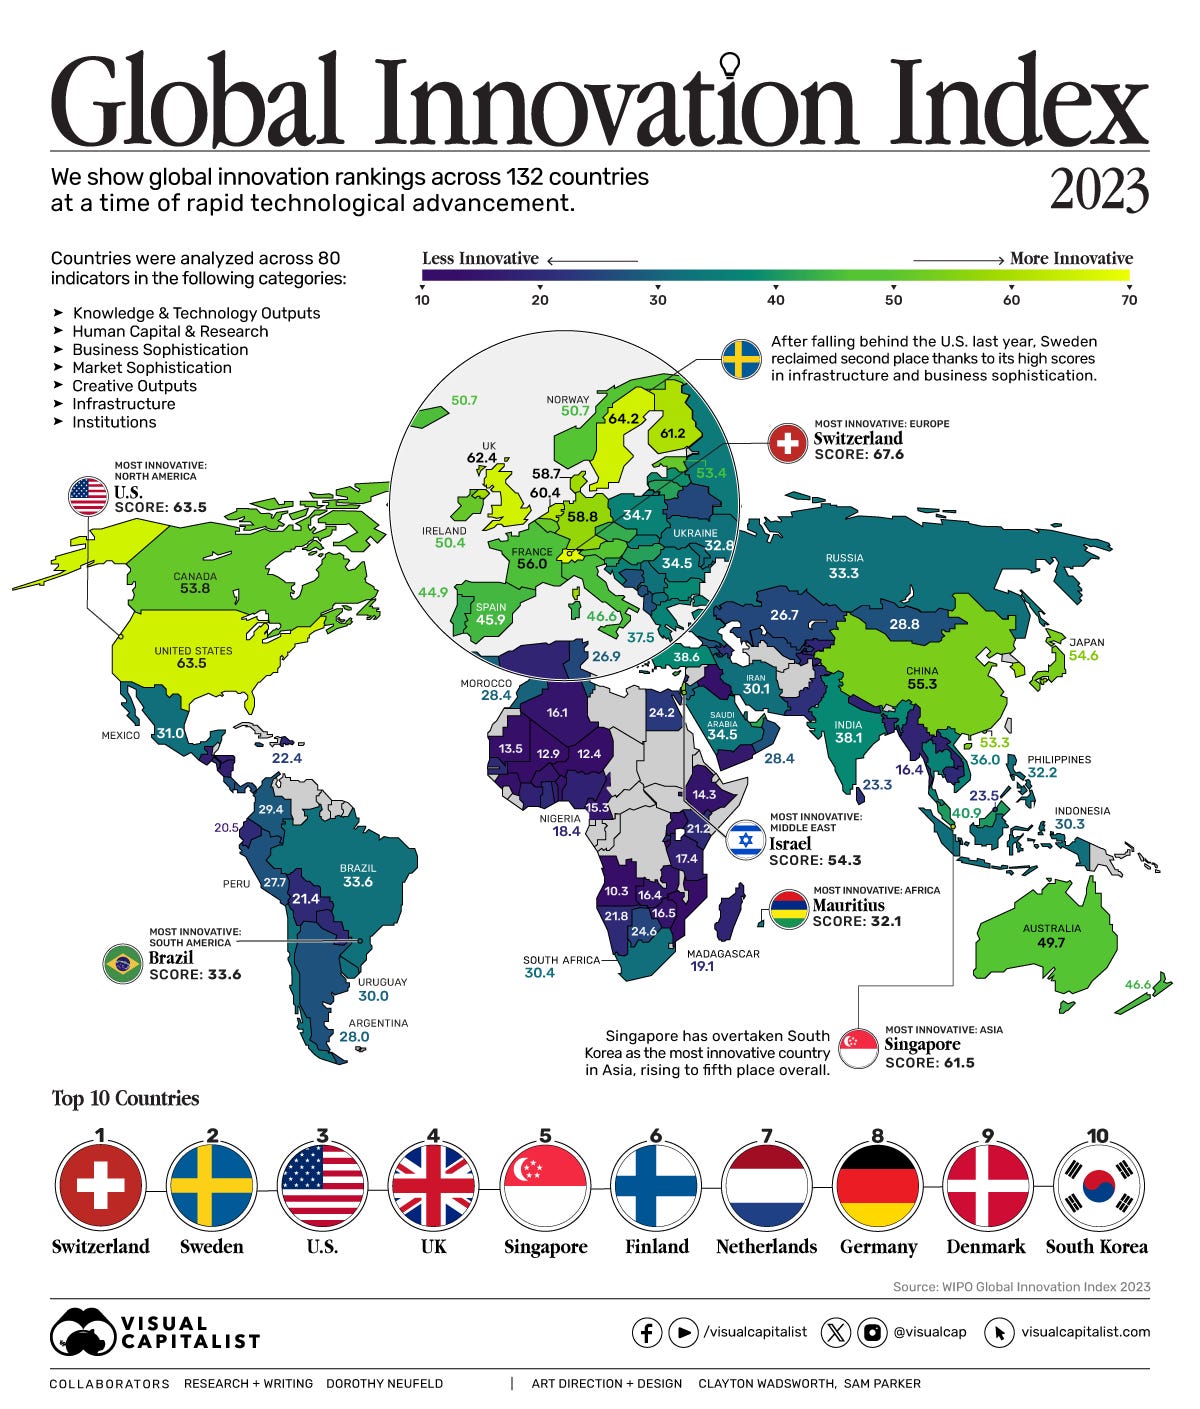 Ranked: The Most Innovative Countries in 2023